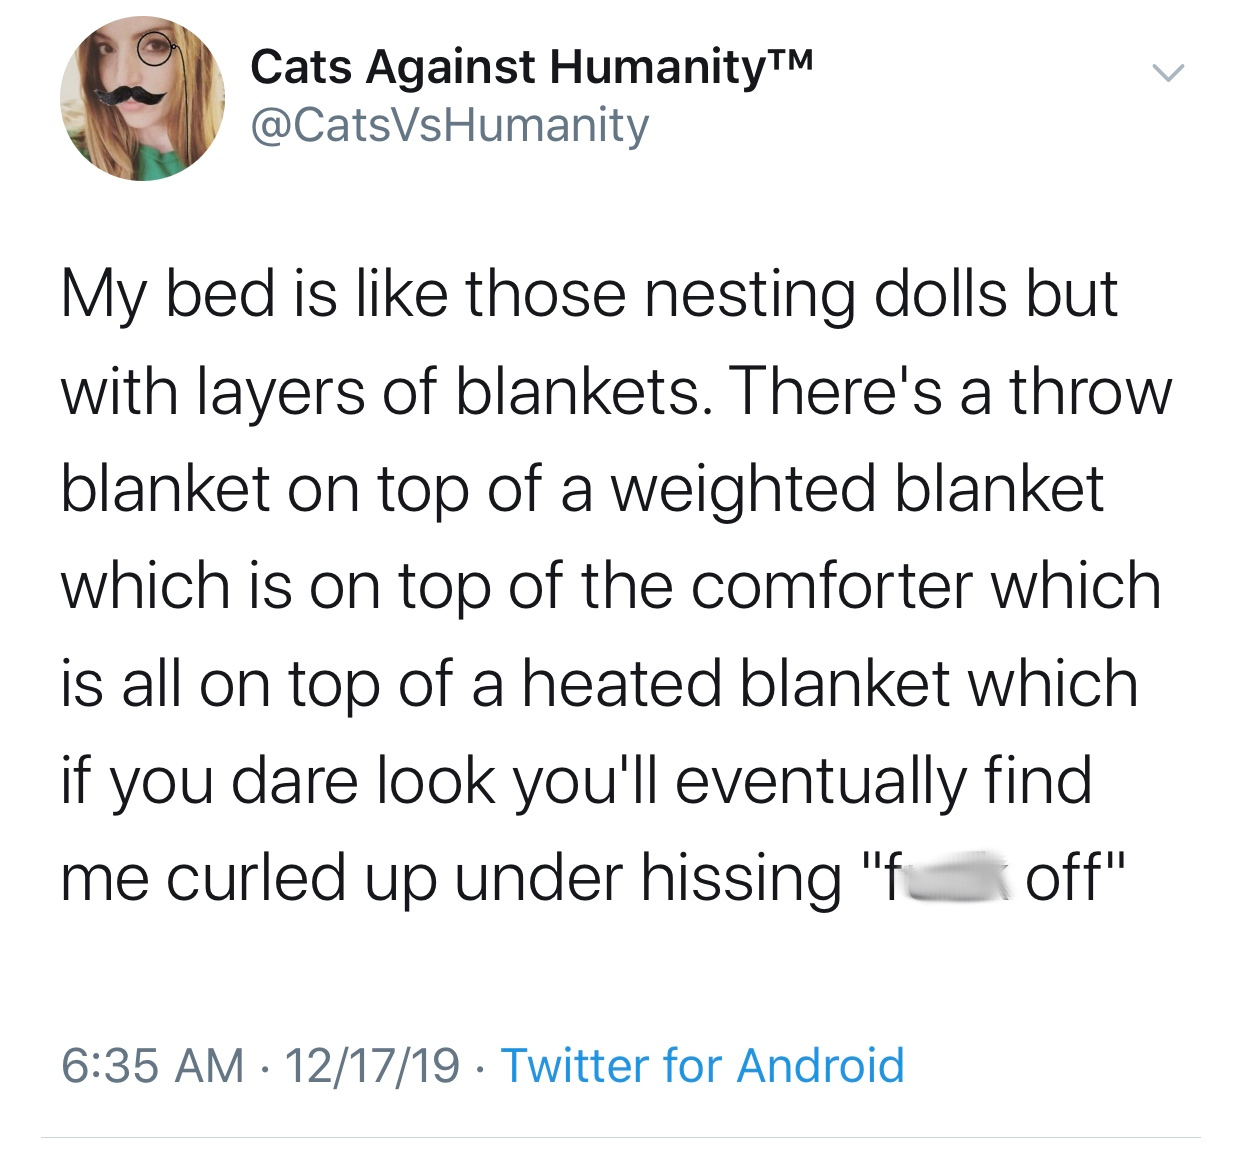 trump wisdom tweet - Cats Against HumanityTM My bed is those nesting dolls but with layers of blankets. There's a throw blanket on top of a weighted blanket which is on top of the comforter which is all on top of a heated blanket which if you dare look yo